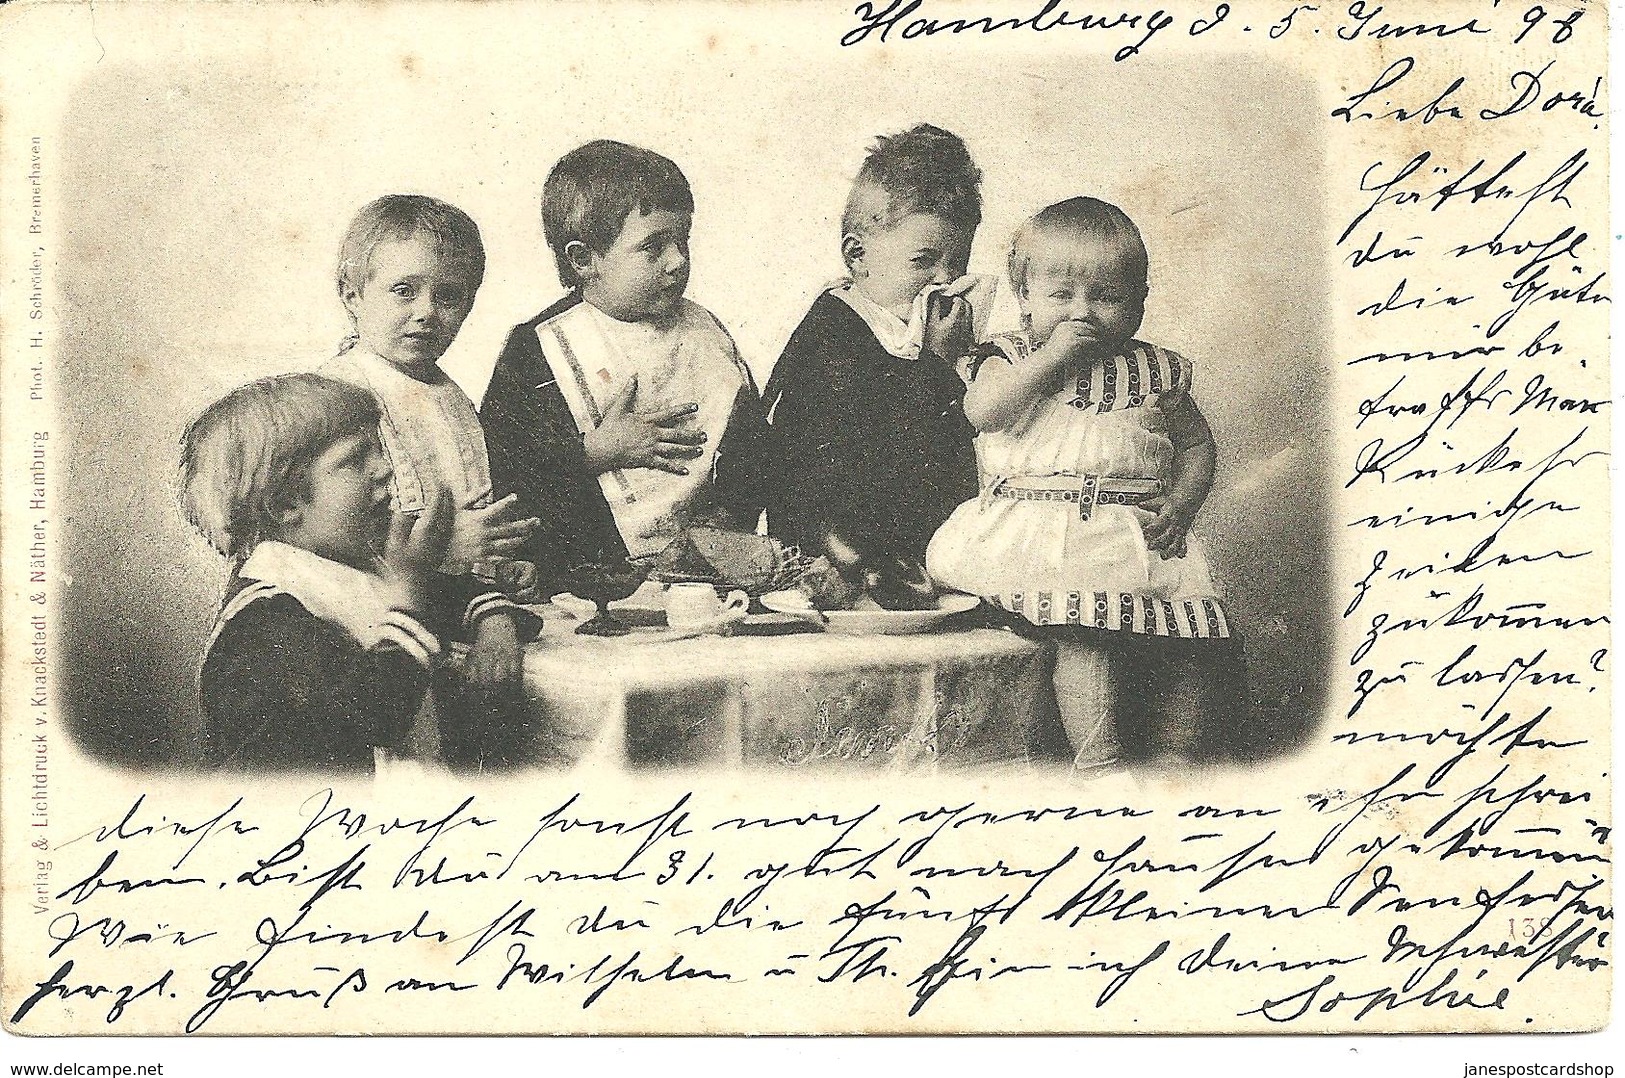 EARLY GERMAN POSTCARD 1898 - GROUP OF CHILDREN - REICHSPOST - FROM HAMBURG & LOKSTEDT - Children And Family Groups